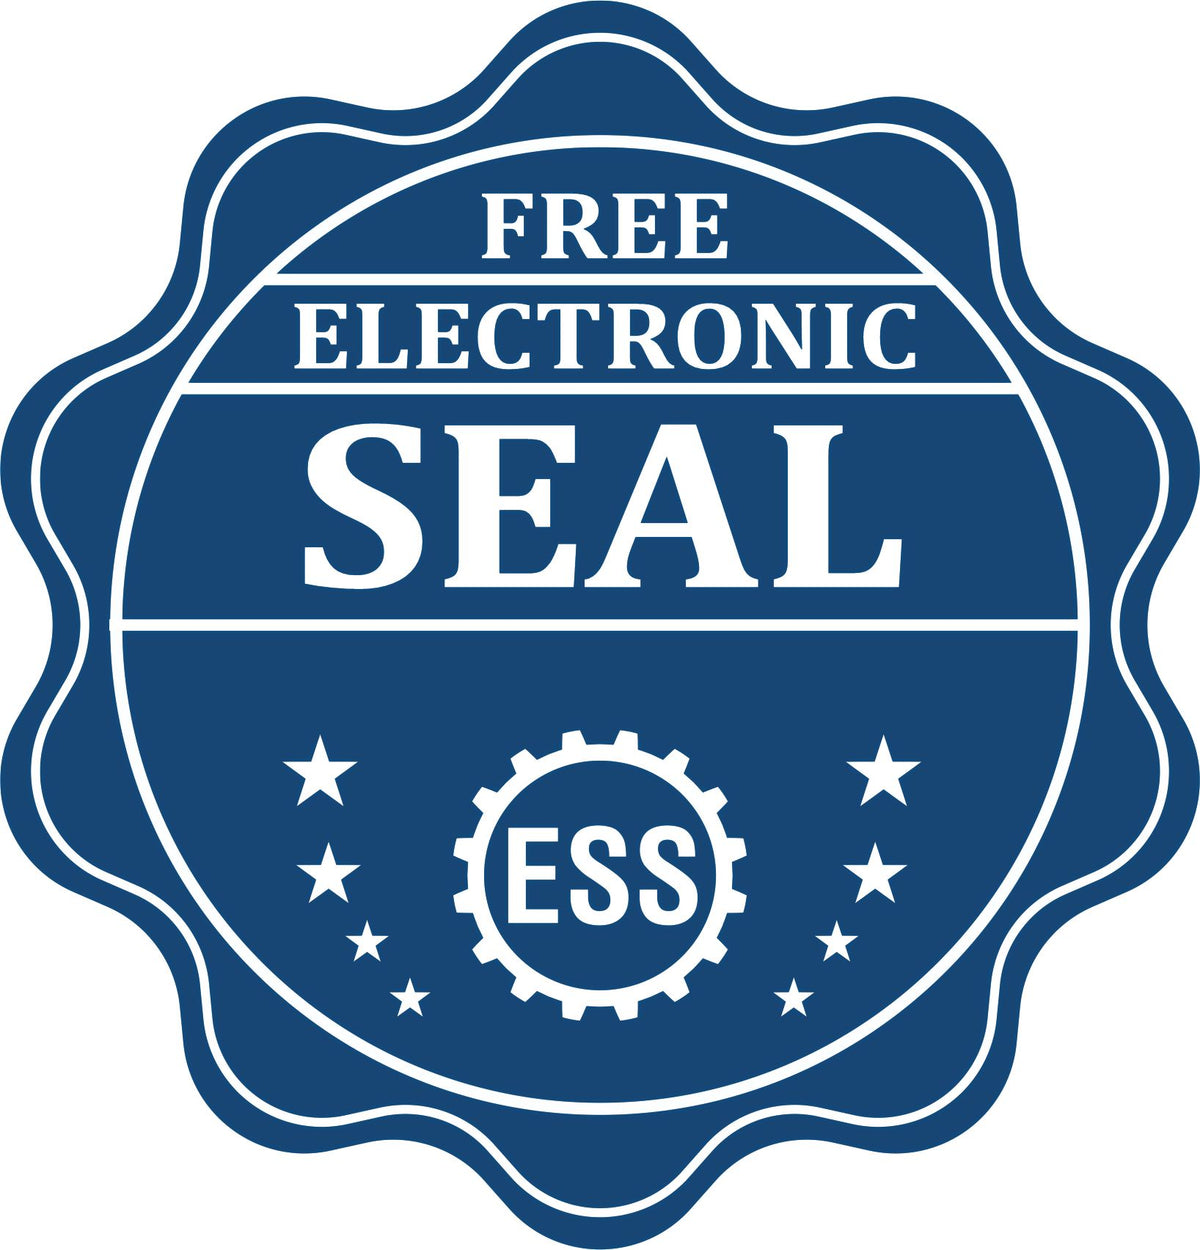 A badge showing a free electronic seal for the Wooden Handle Georgia Rectangular Notary Public Stamp with stars and the ESS gear on the emblem.